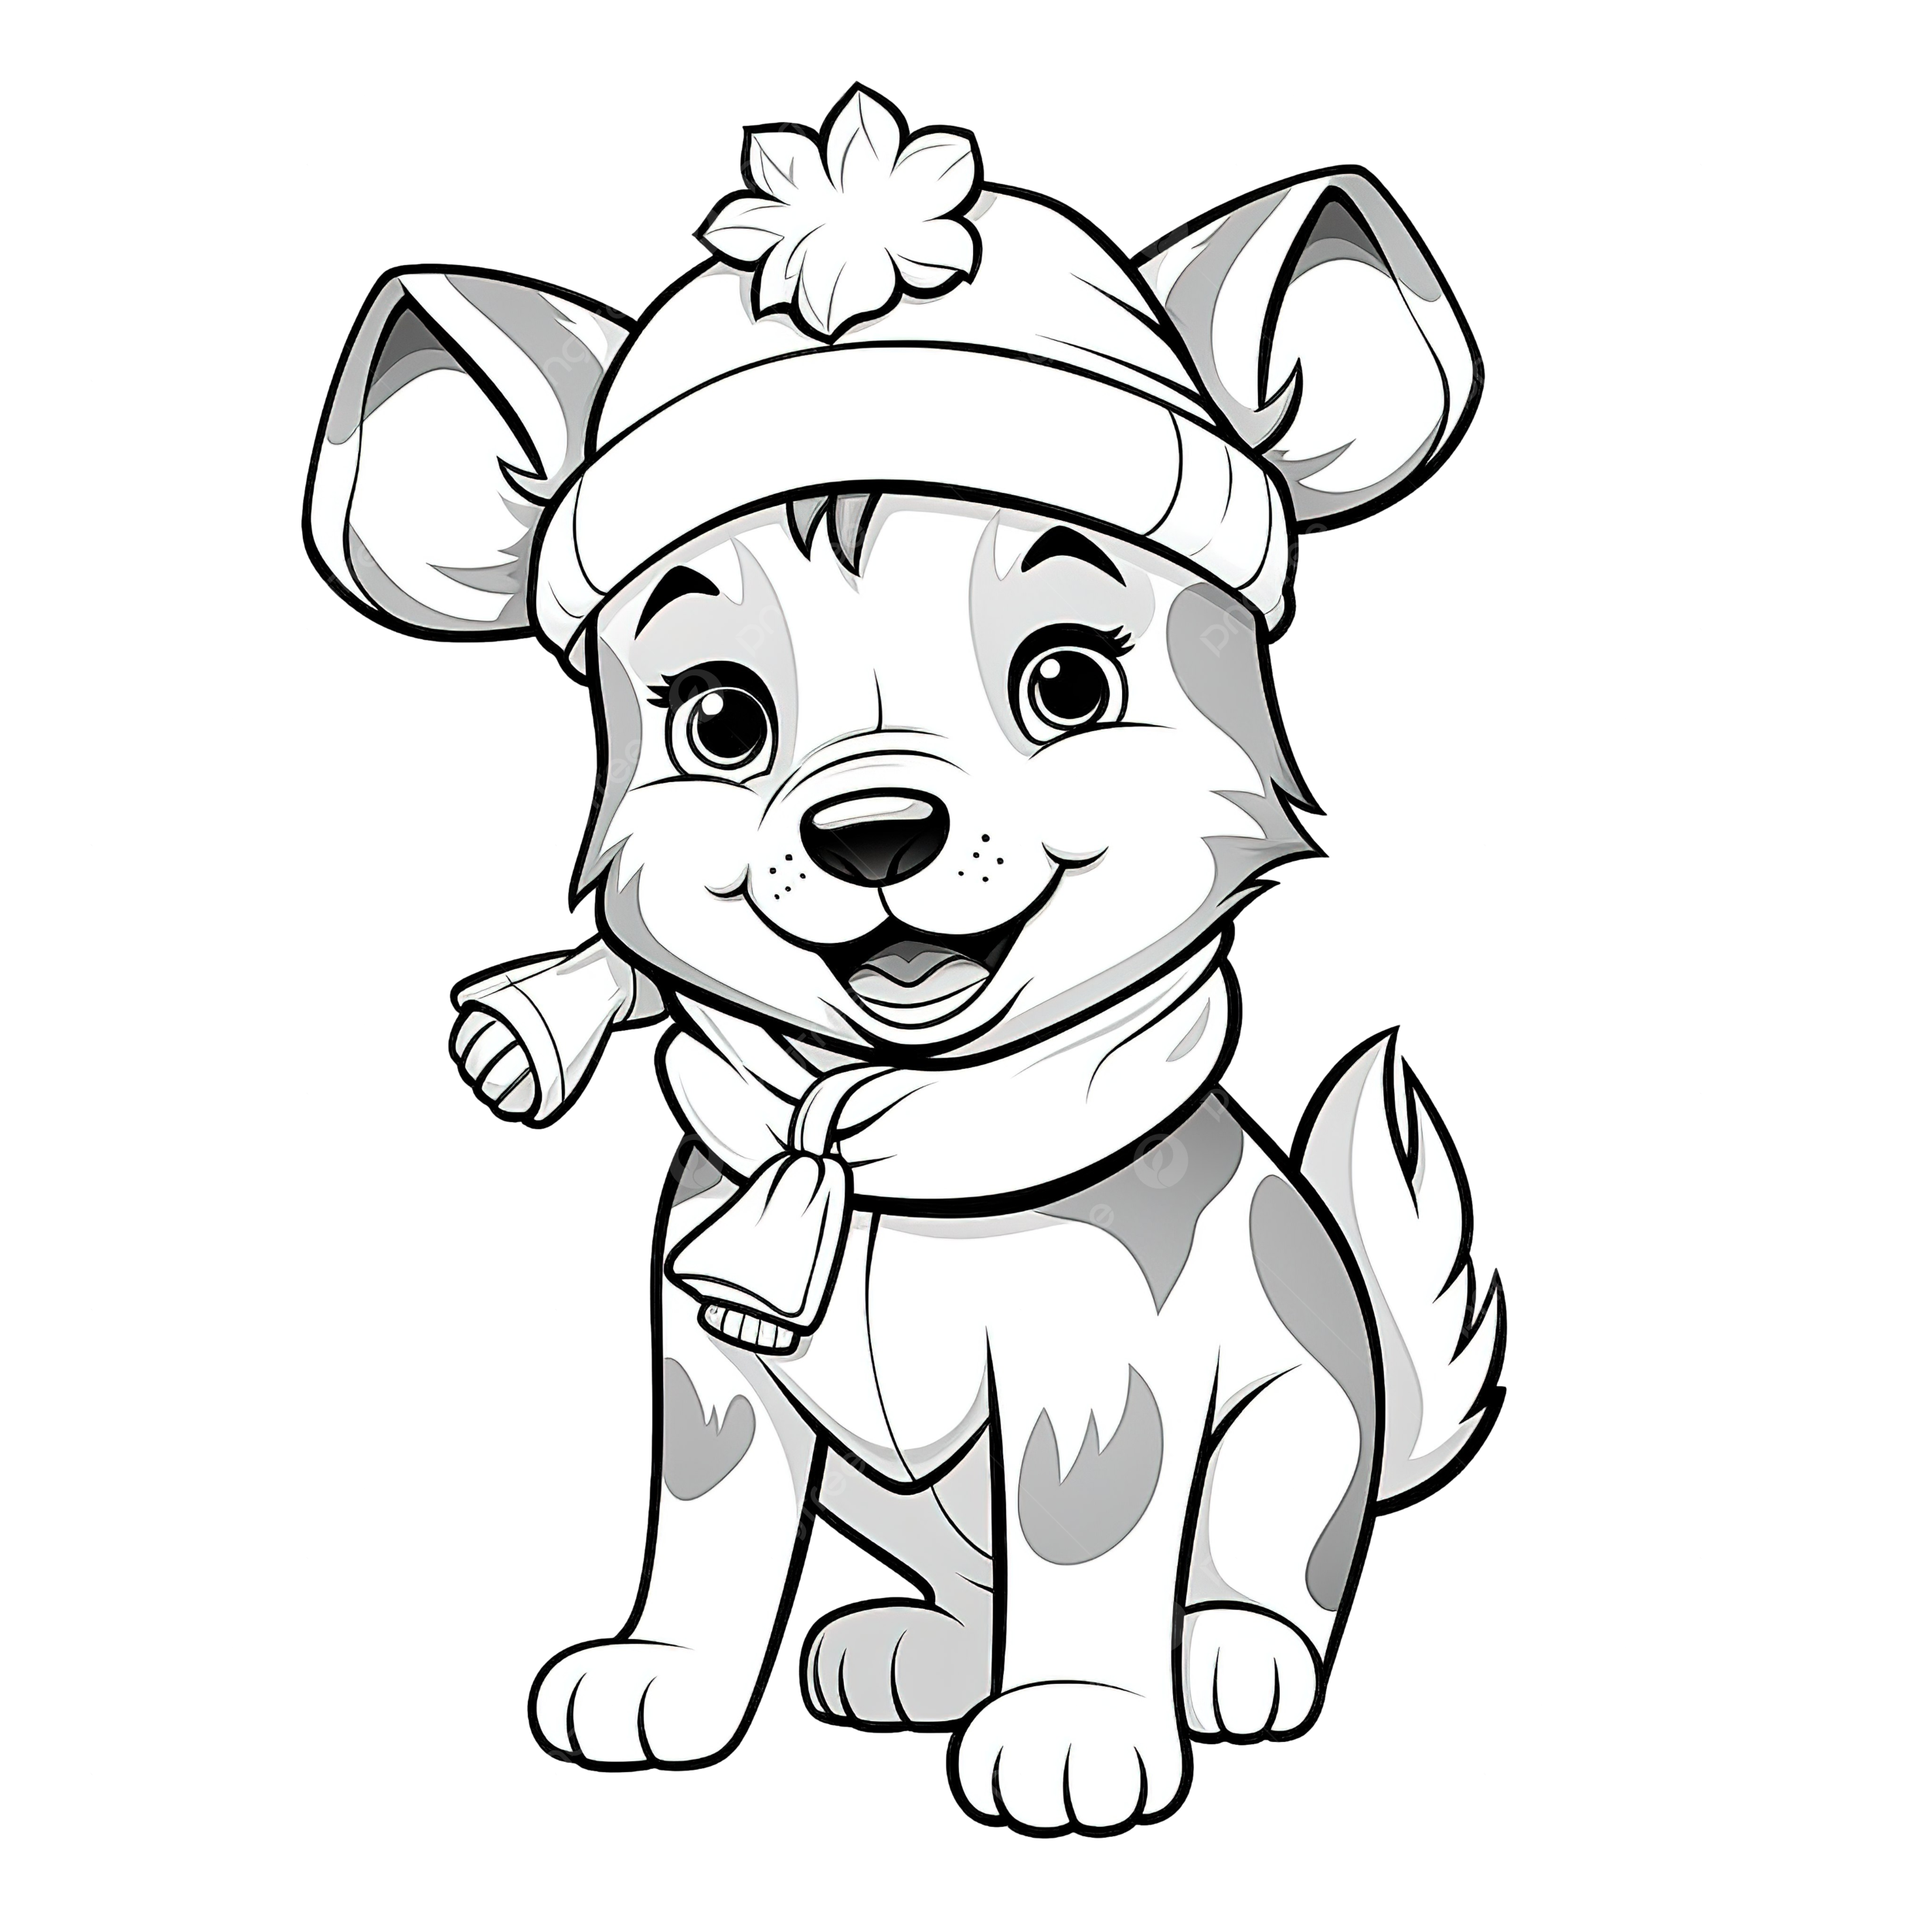 Coloring book with a cute husky dog christmas characters with a santa hat jacket and scarf coloring pages christmas coloring png transparent image and clipart for free download